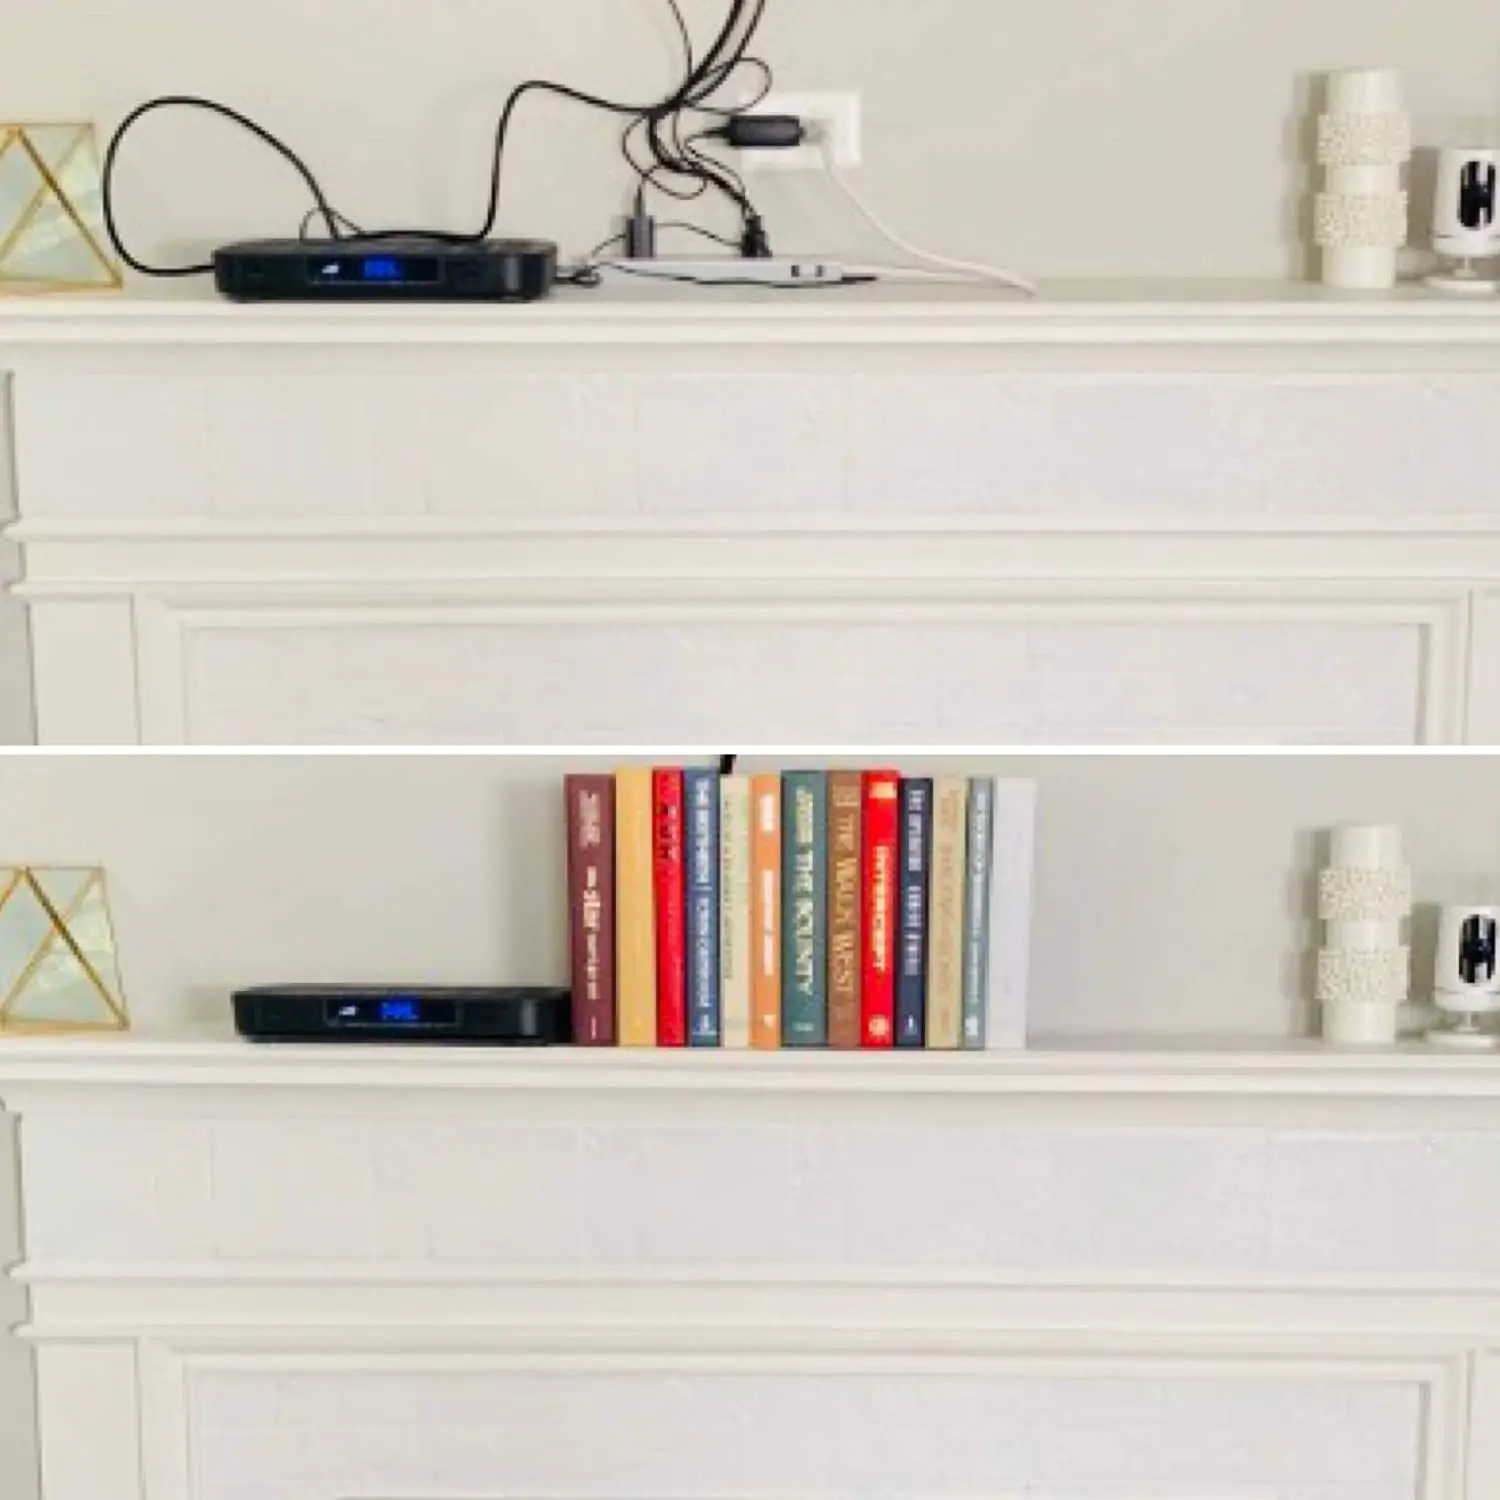 Don't hide your tech cables and cords. Display them artfully